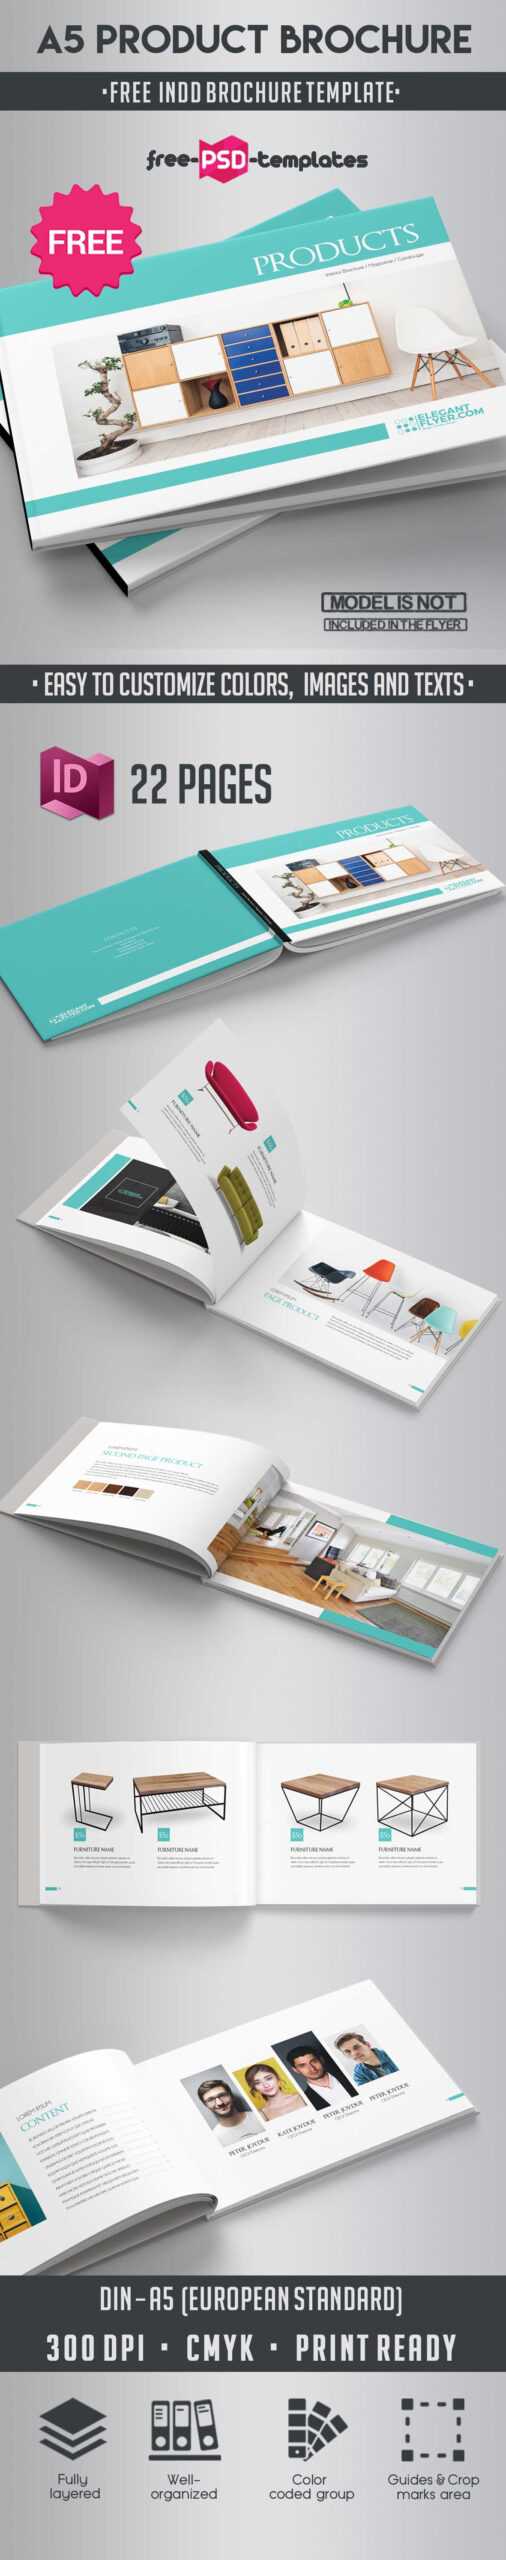 Free A5 Product Catalog Brochure Indd Template | Free Psd Pertaining To Product Brochure Template Free